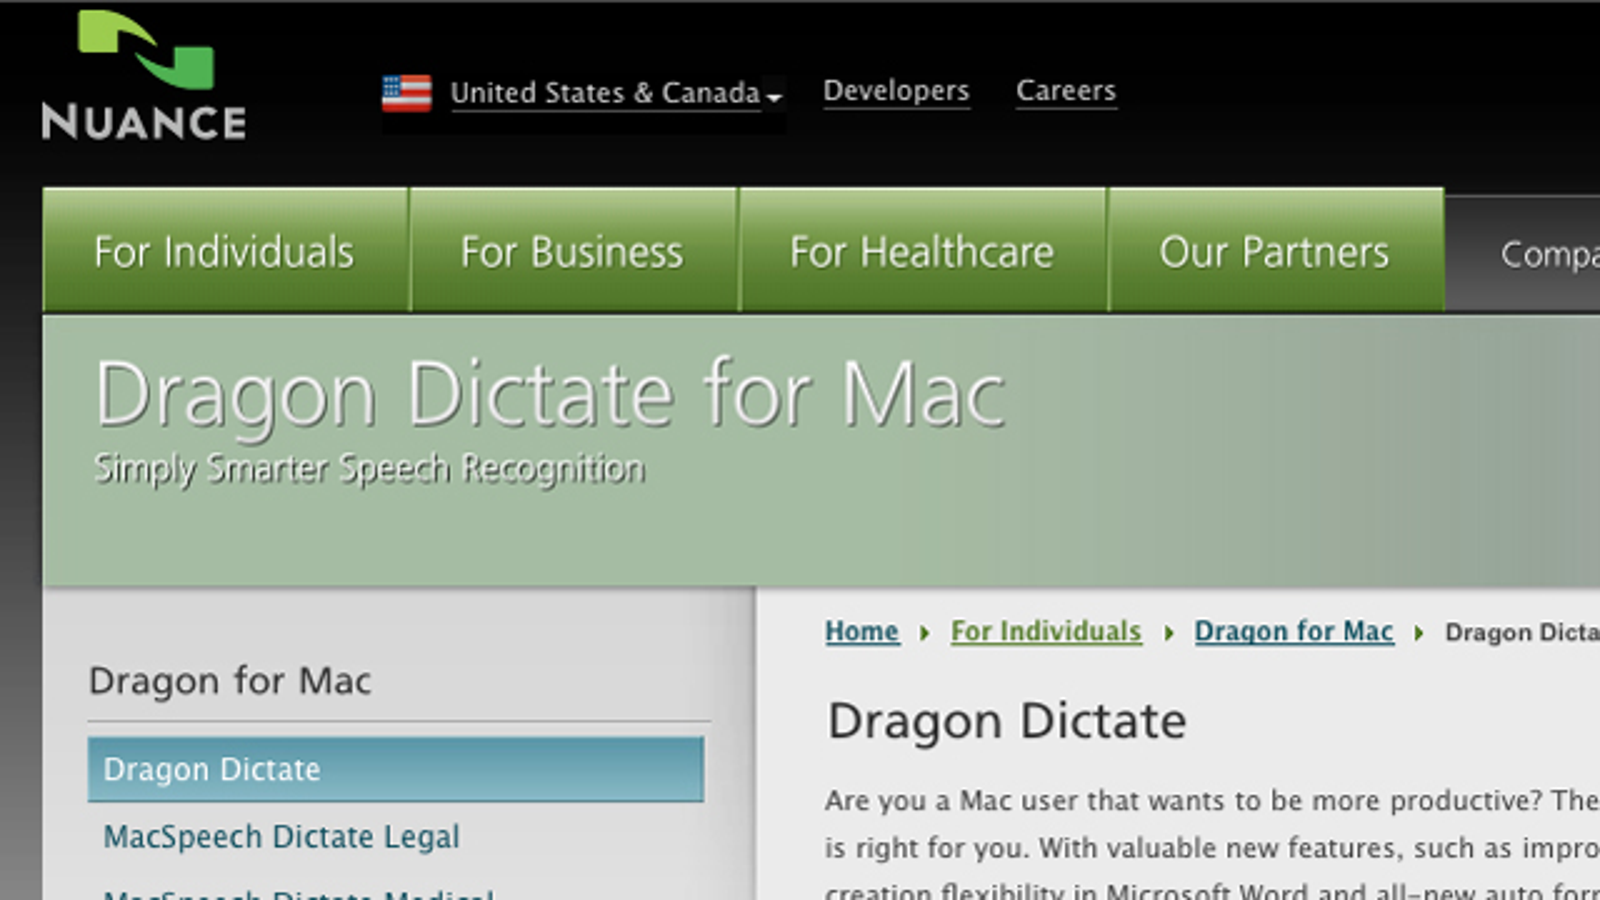 dragon dictate for mac 5.0.2